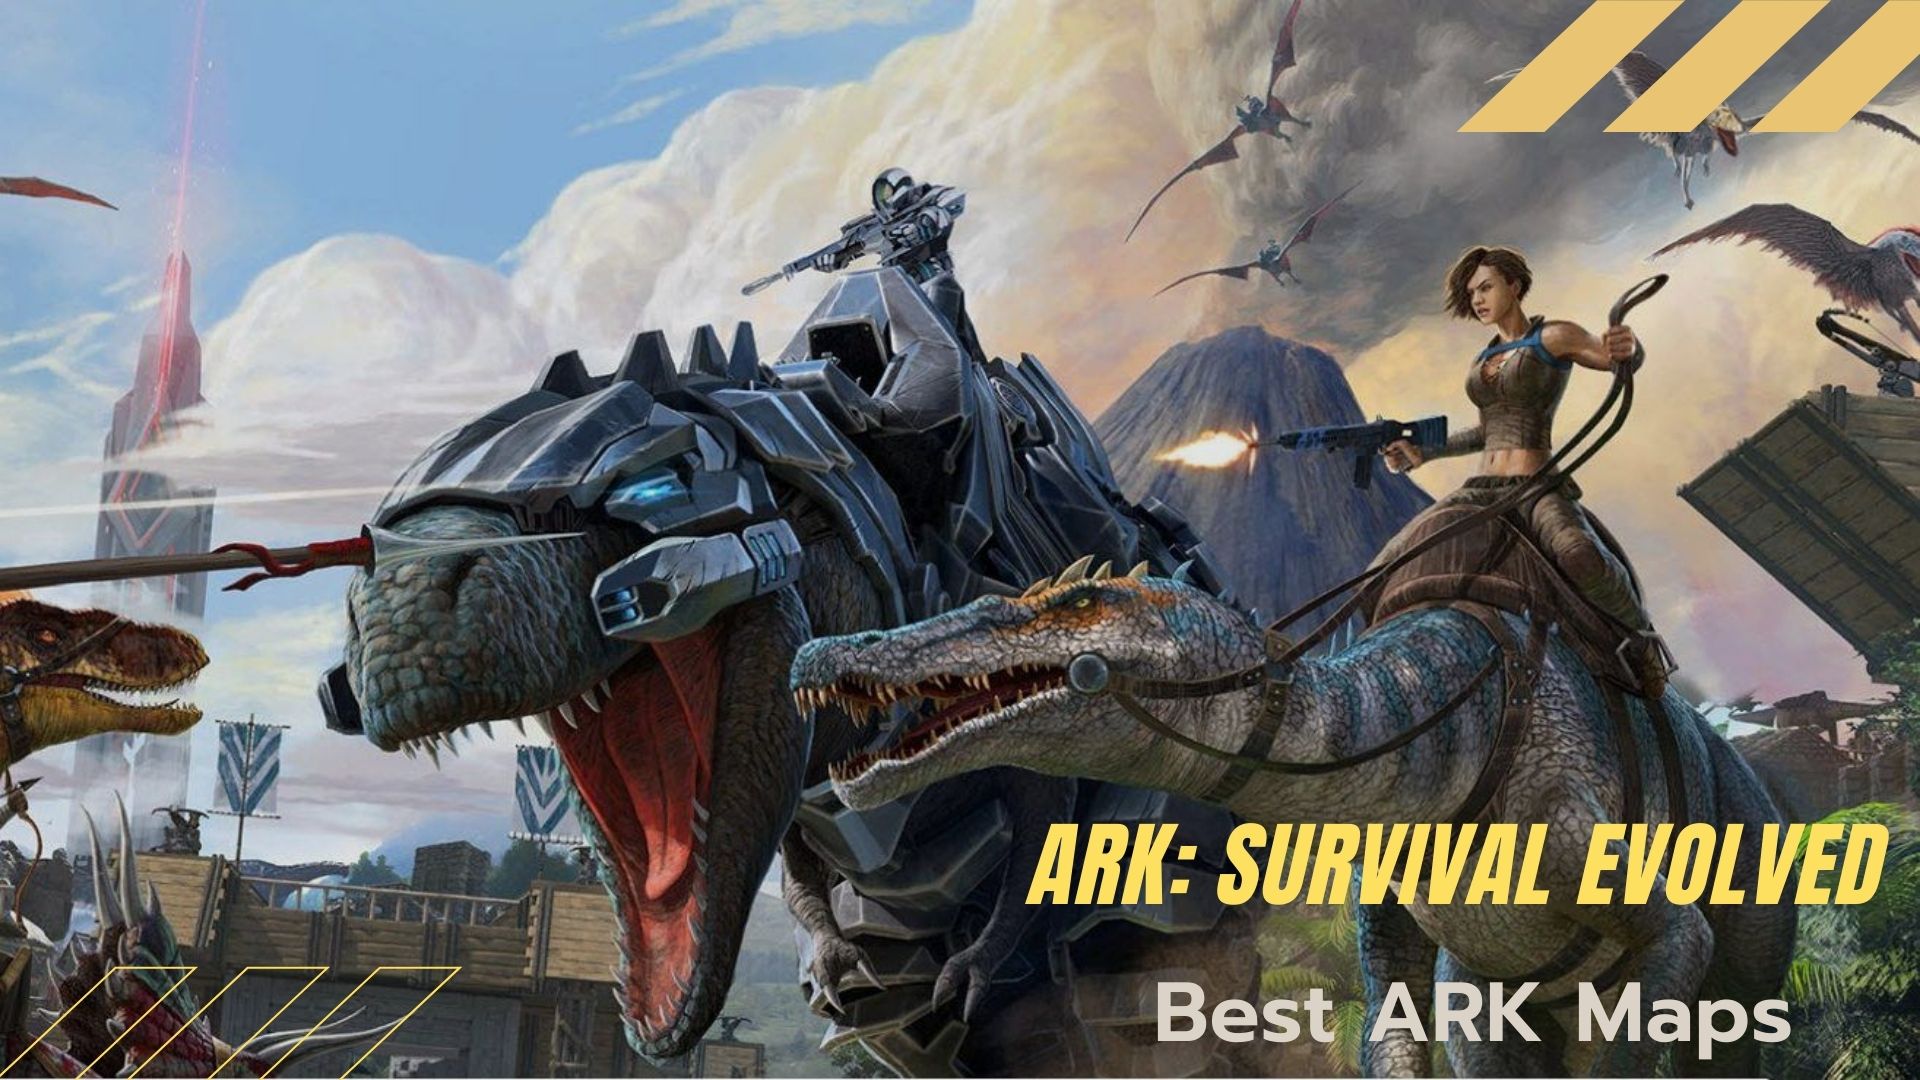 Best Ark Map Features, Creatures, Weather And More